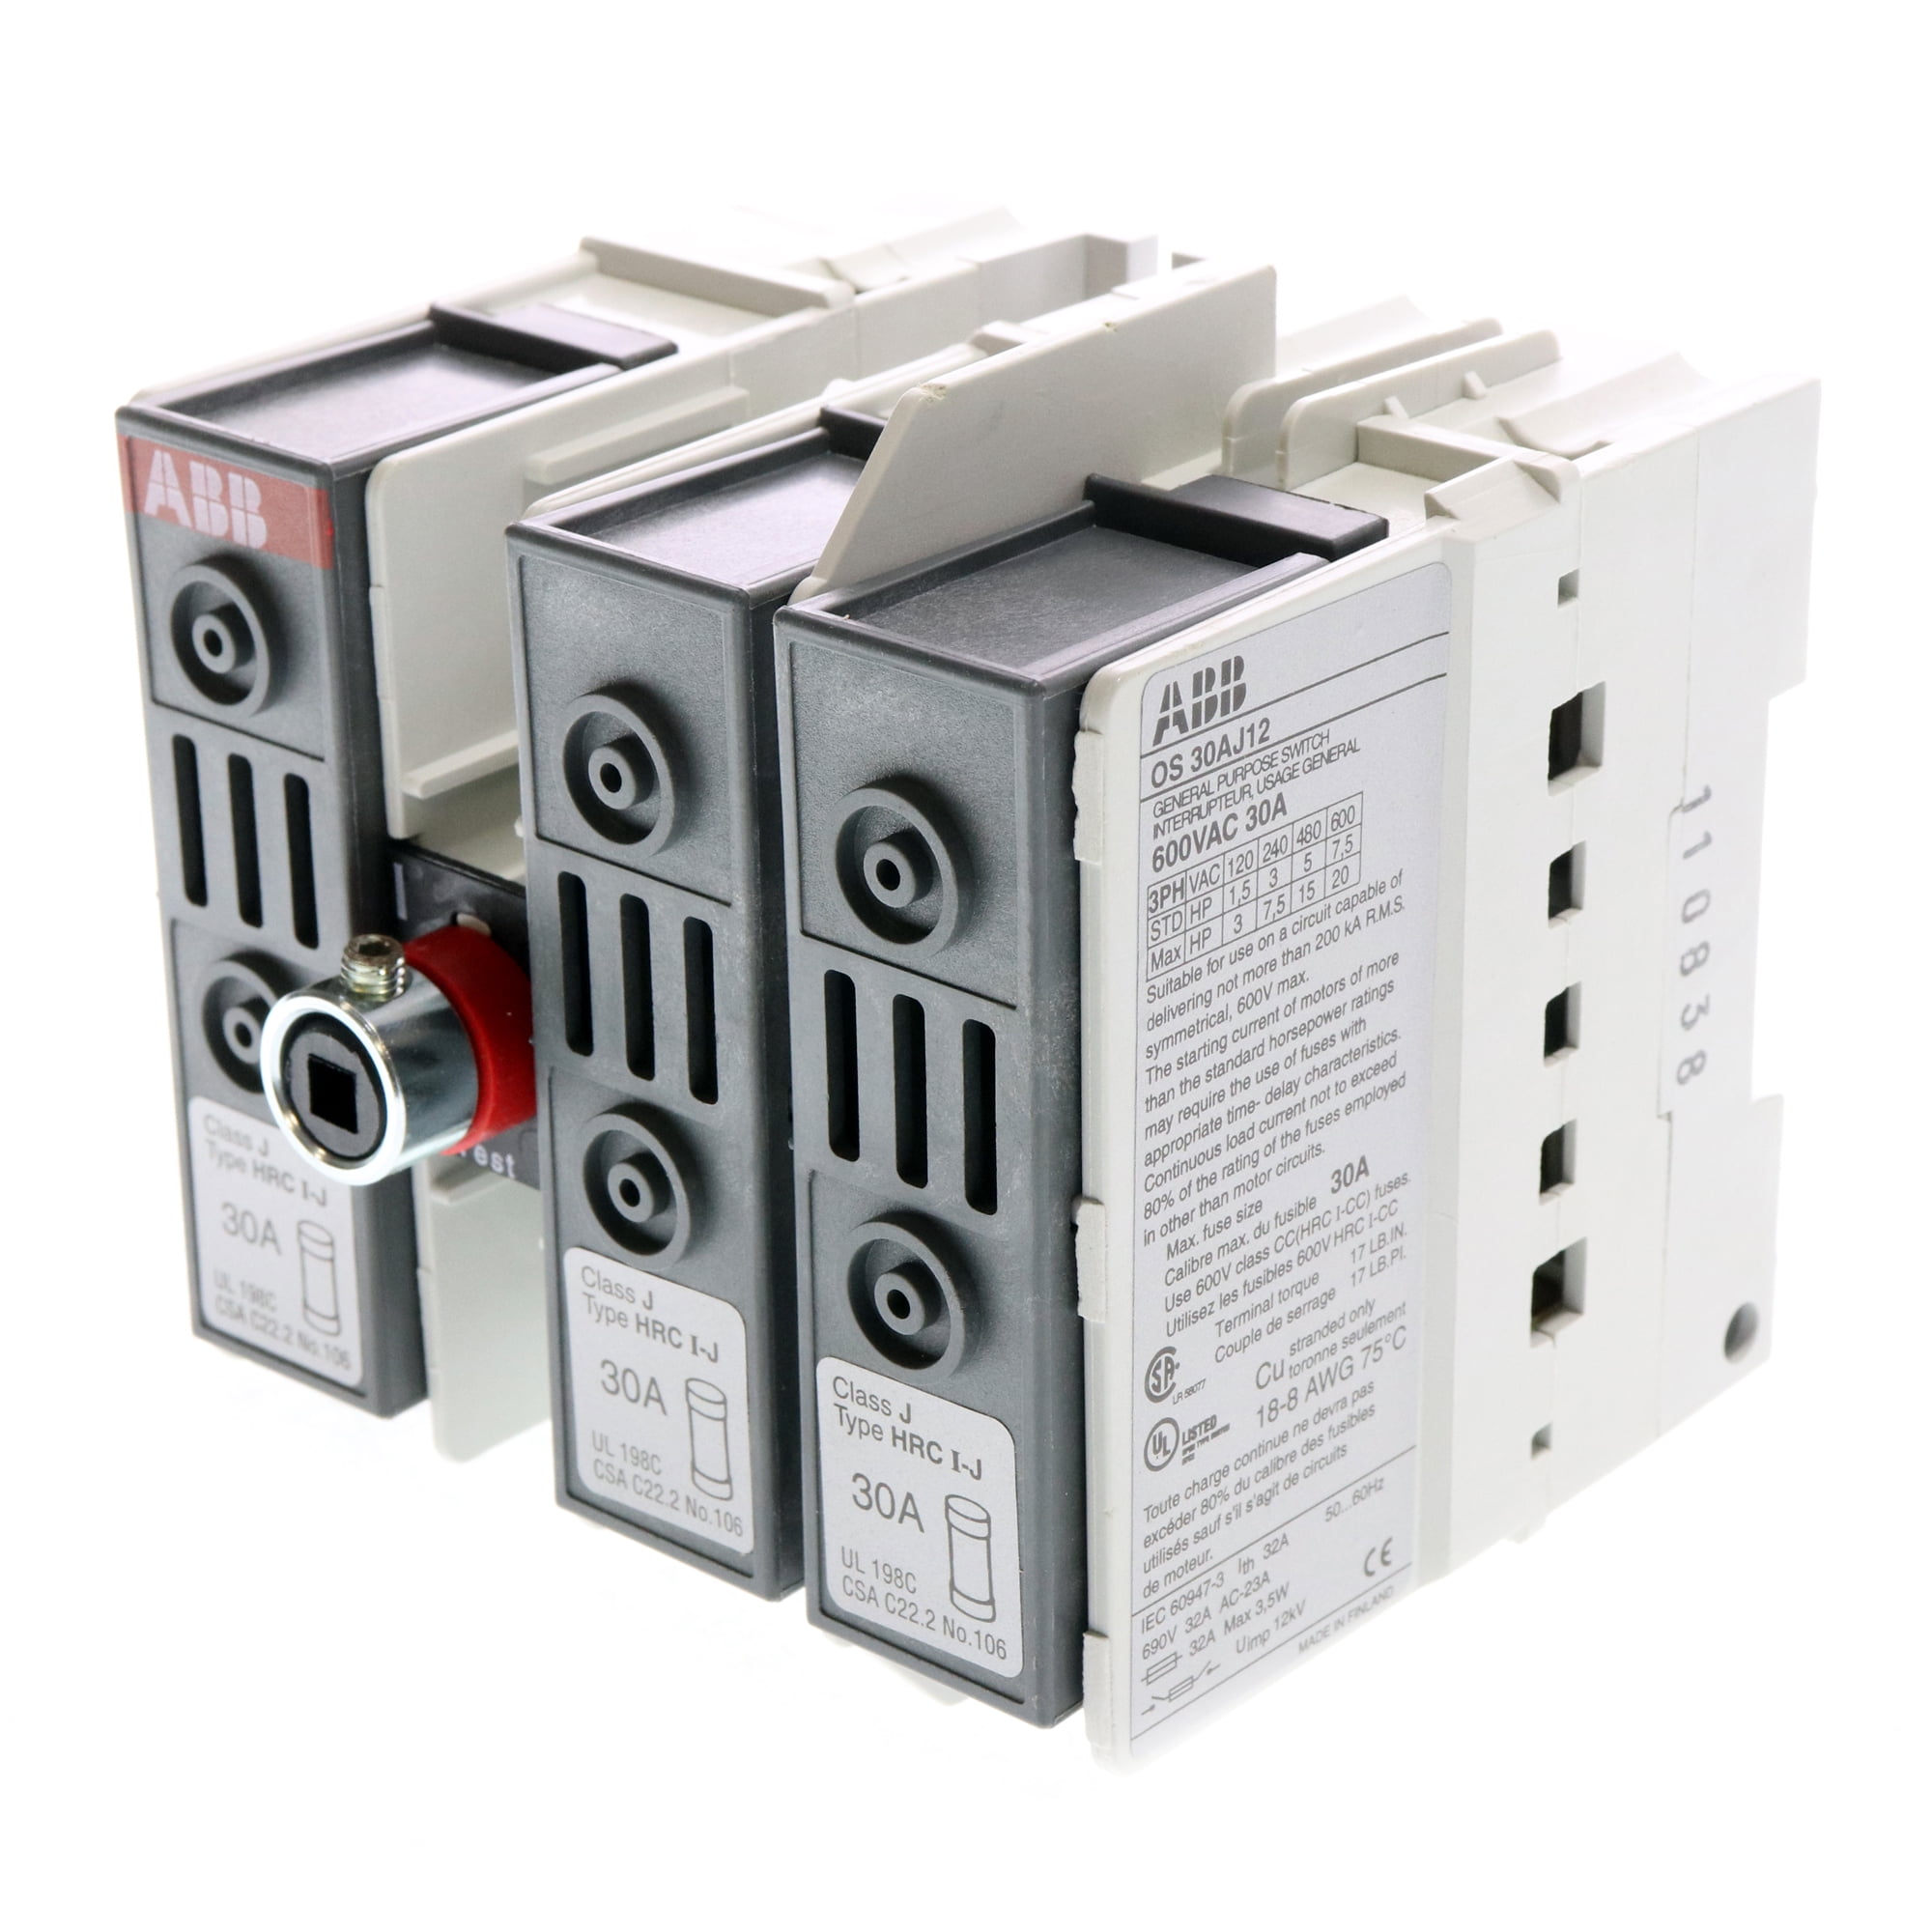 Relay with Fuse 12V 30A, 2x87, Replaced, ReplaceItalamec 609/218, 10-Piece!